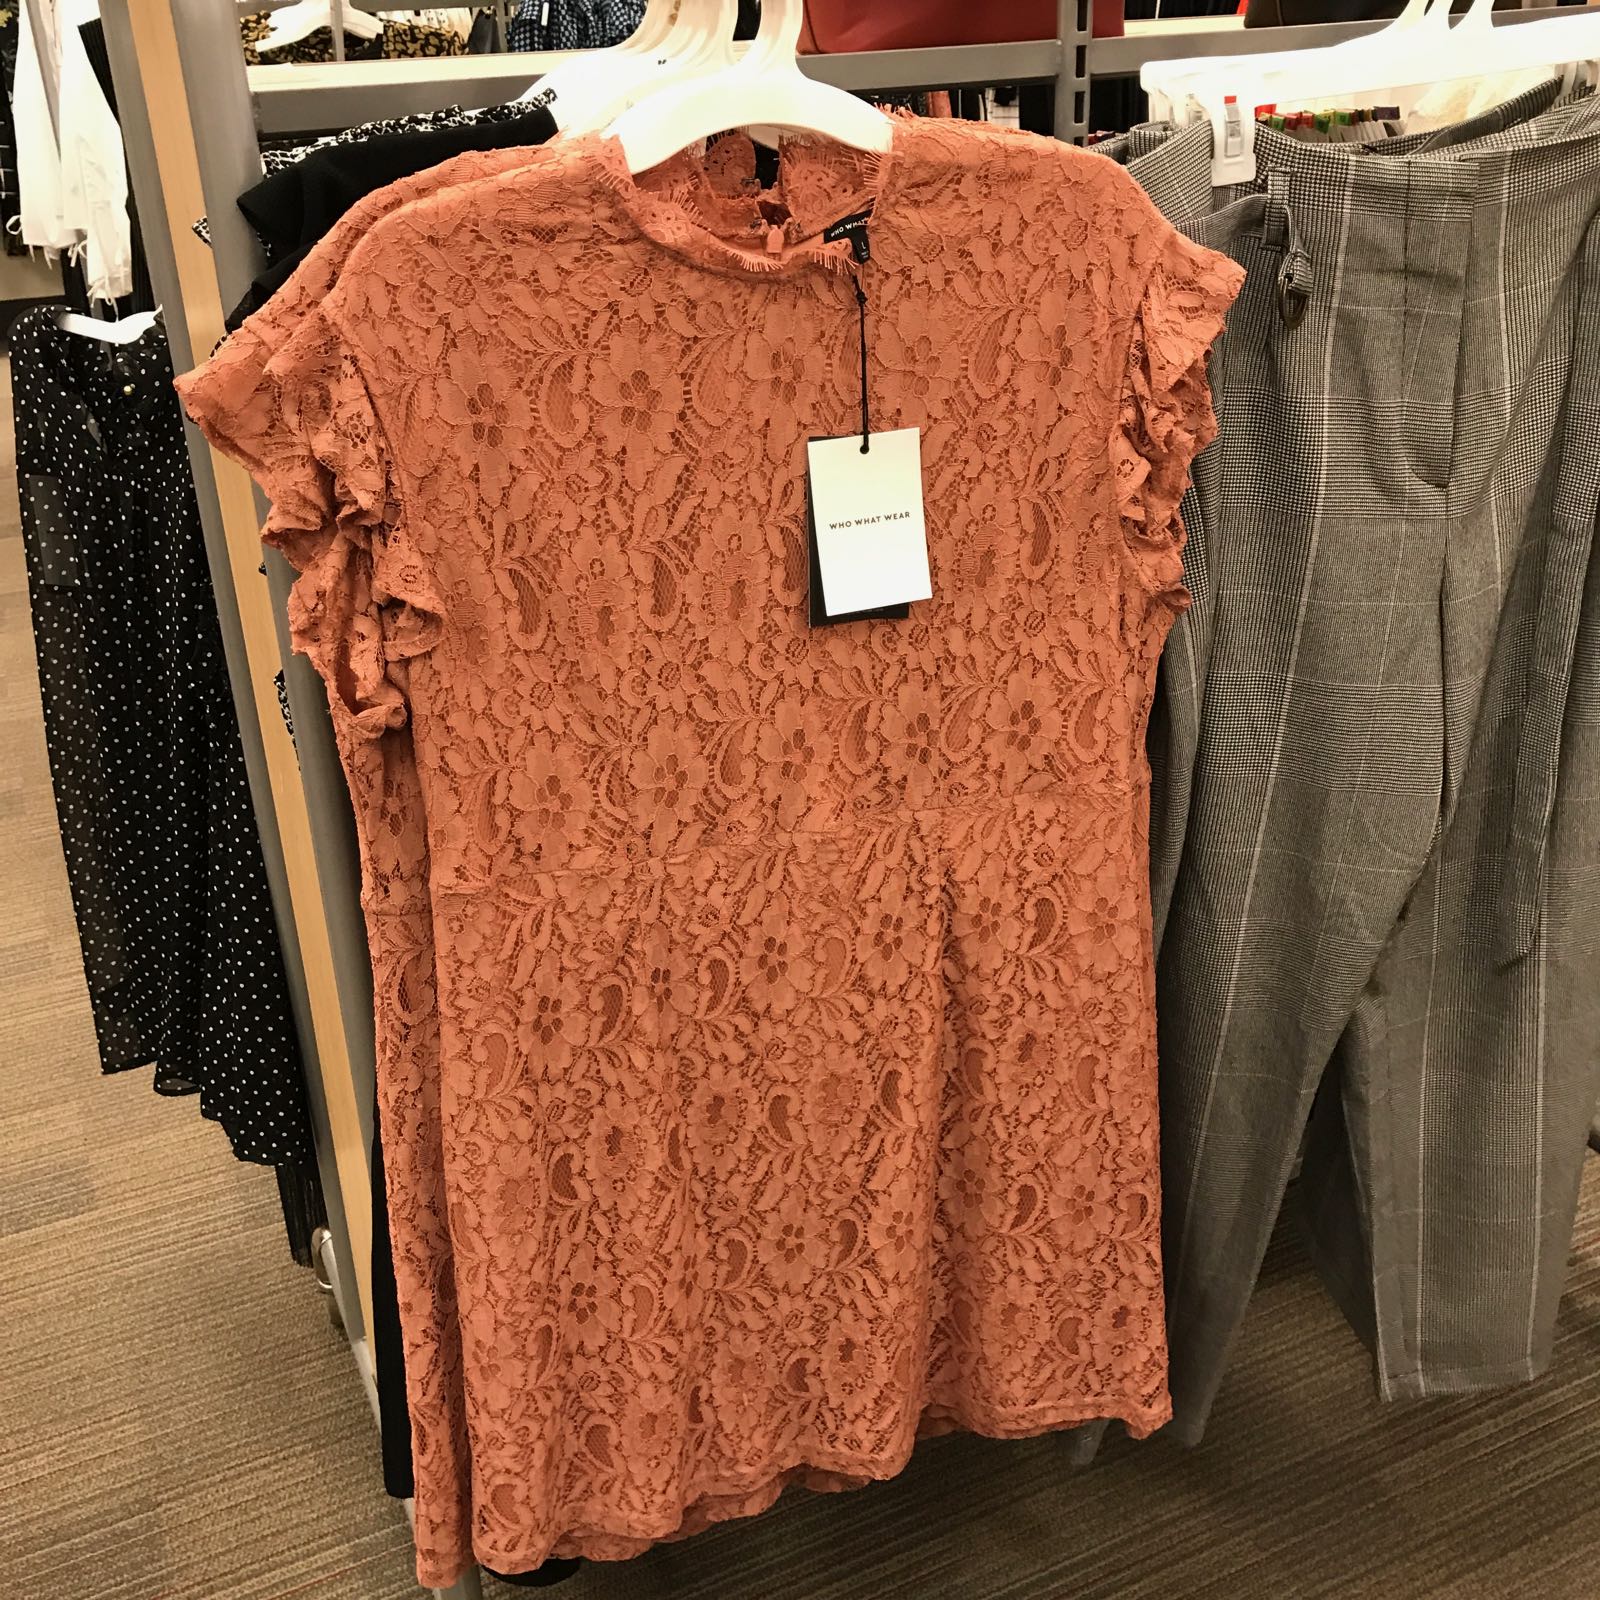 Such cute stuff for fall at Target